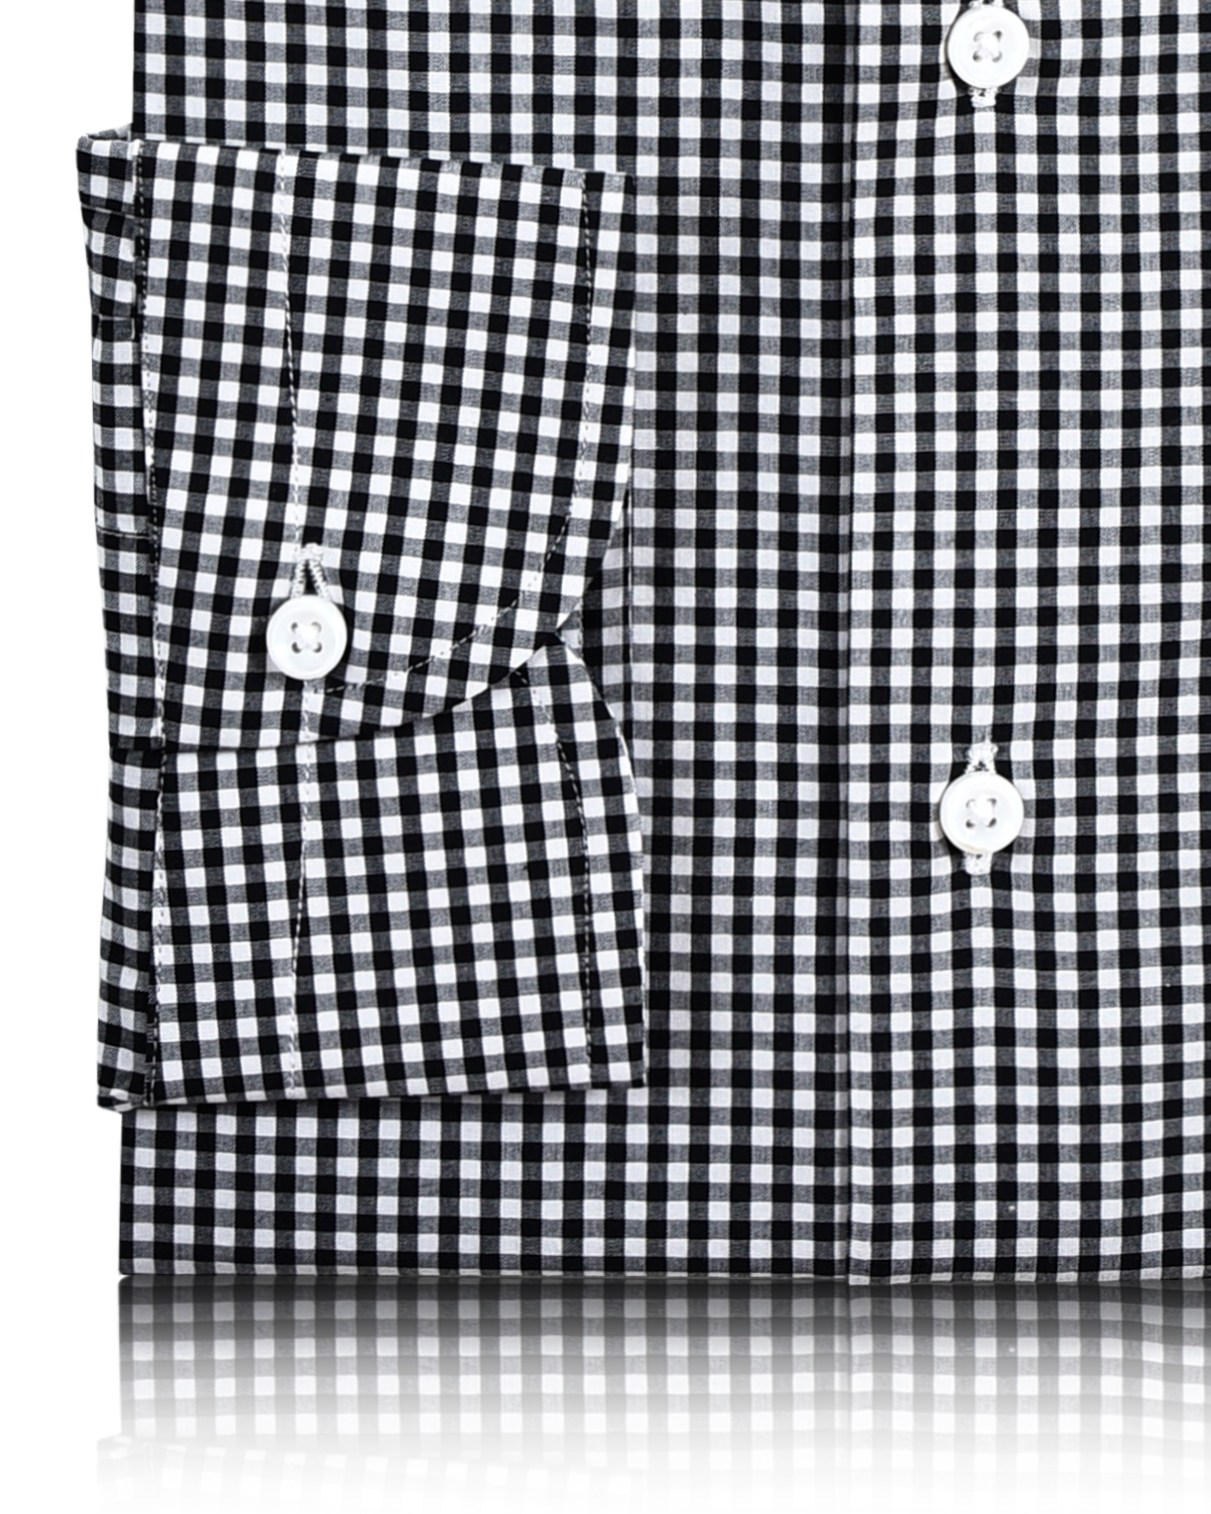 Close up view of custom check shirts for men by Luxire black and white gingham